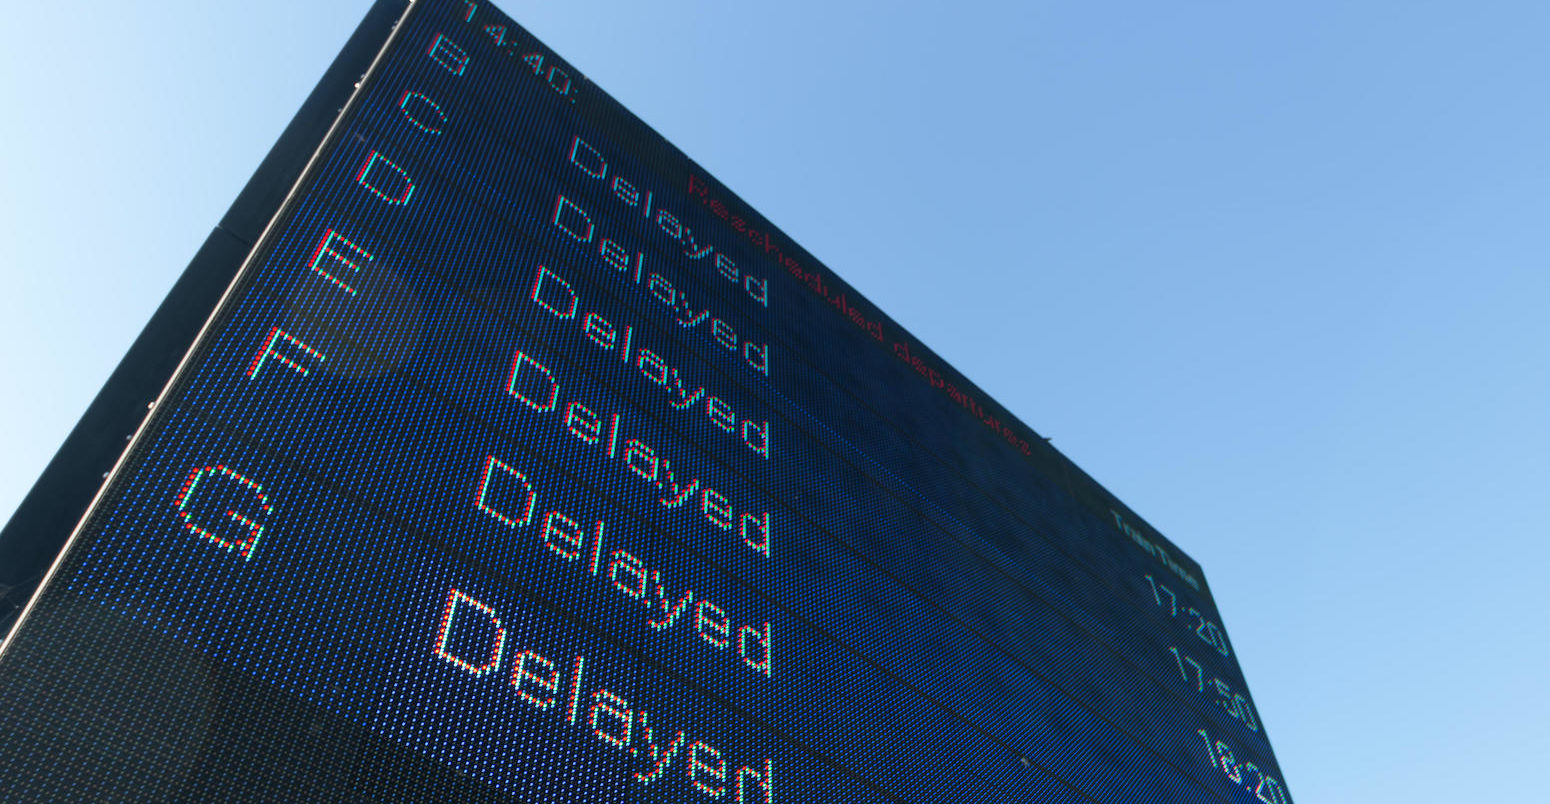 Display board showing extreme delays.